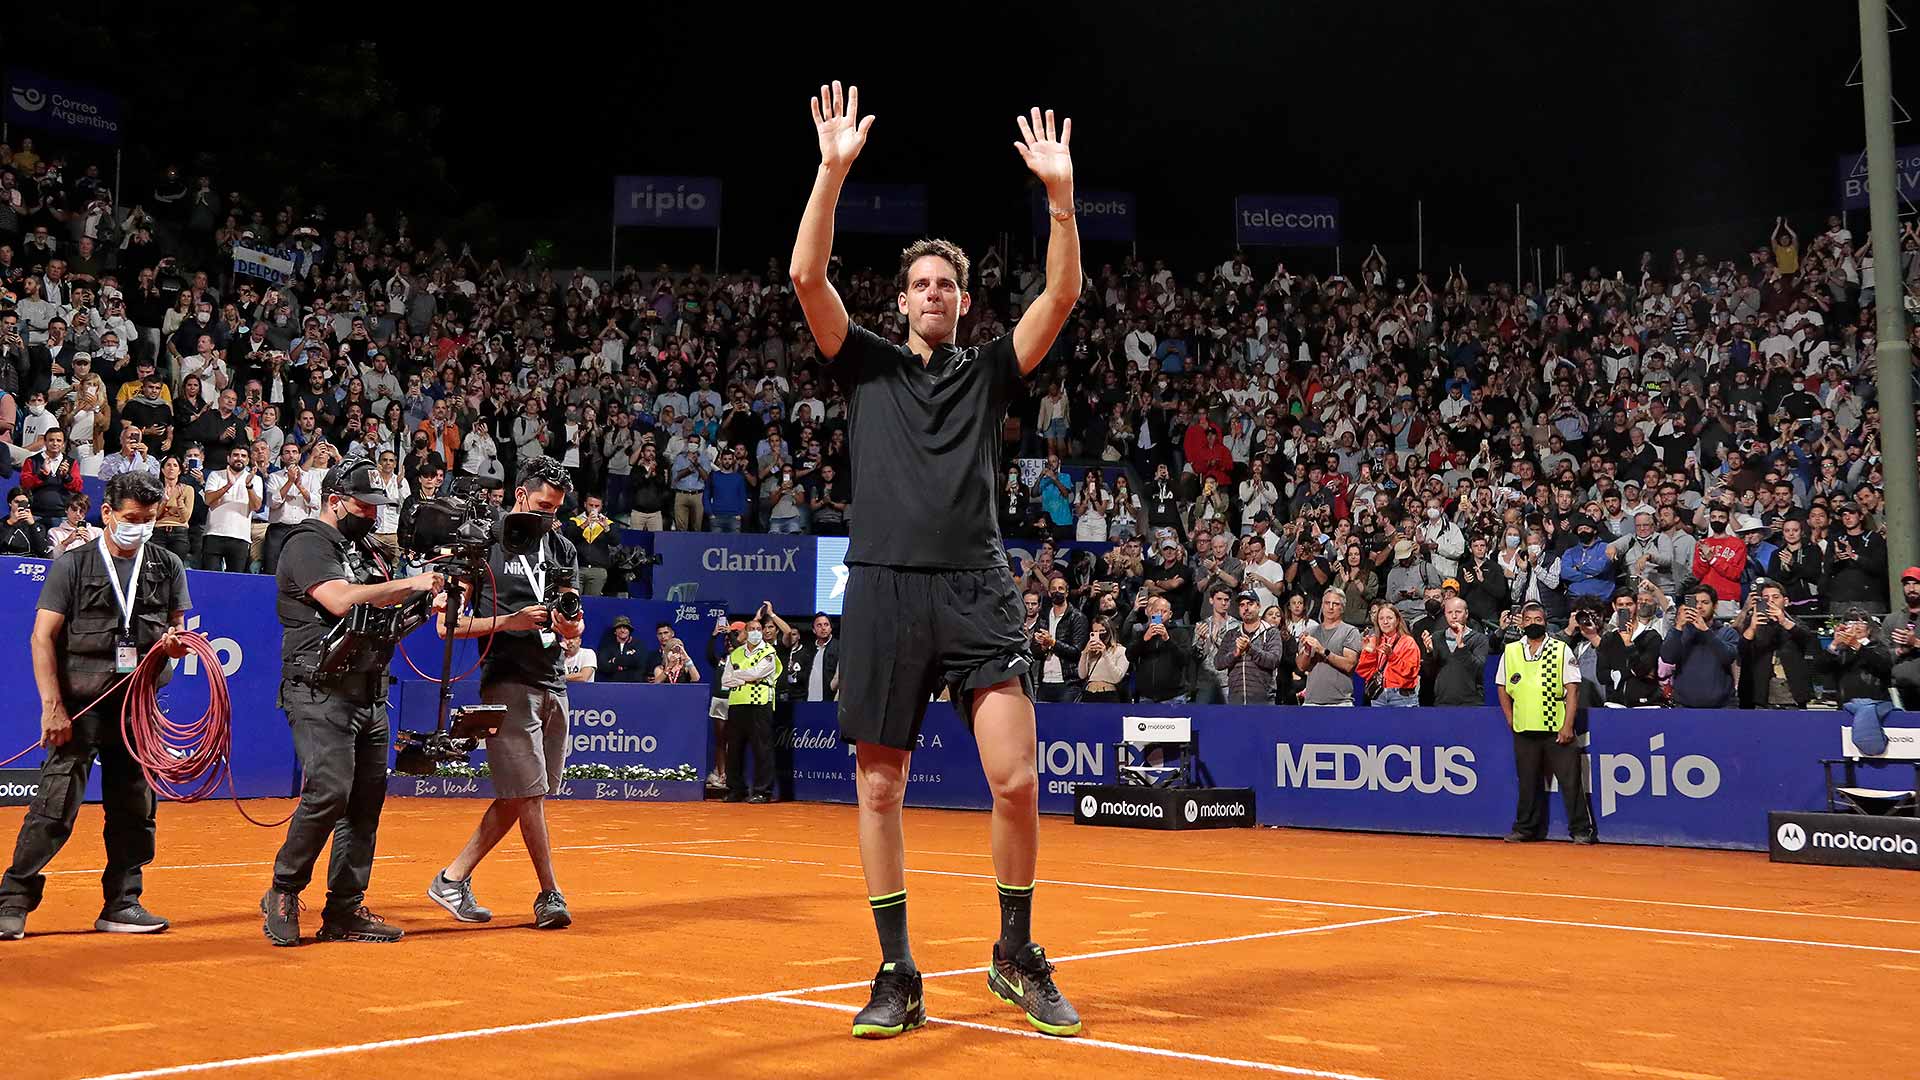 <a href='https://www.atptour.com/en/players/juan-martin-del-potro/d683/overview'>Juan Martin del Potro</a> says farewell to fans at the <a href='https://www.atptour.com/en/tournaments/buenos-aires/506/overview'>Argentina Open</a>.